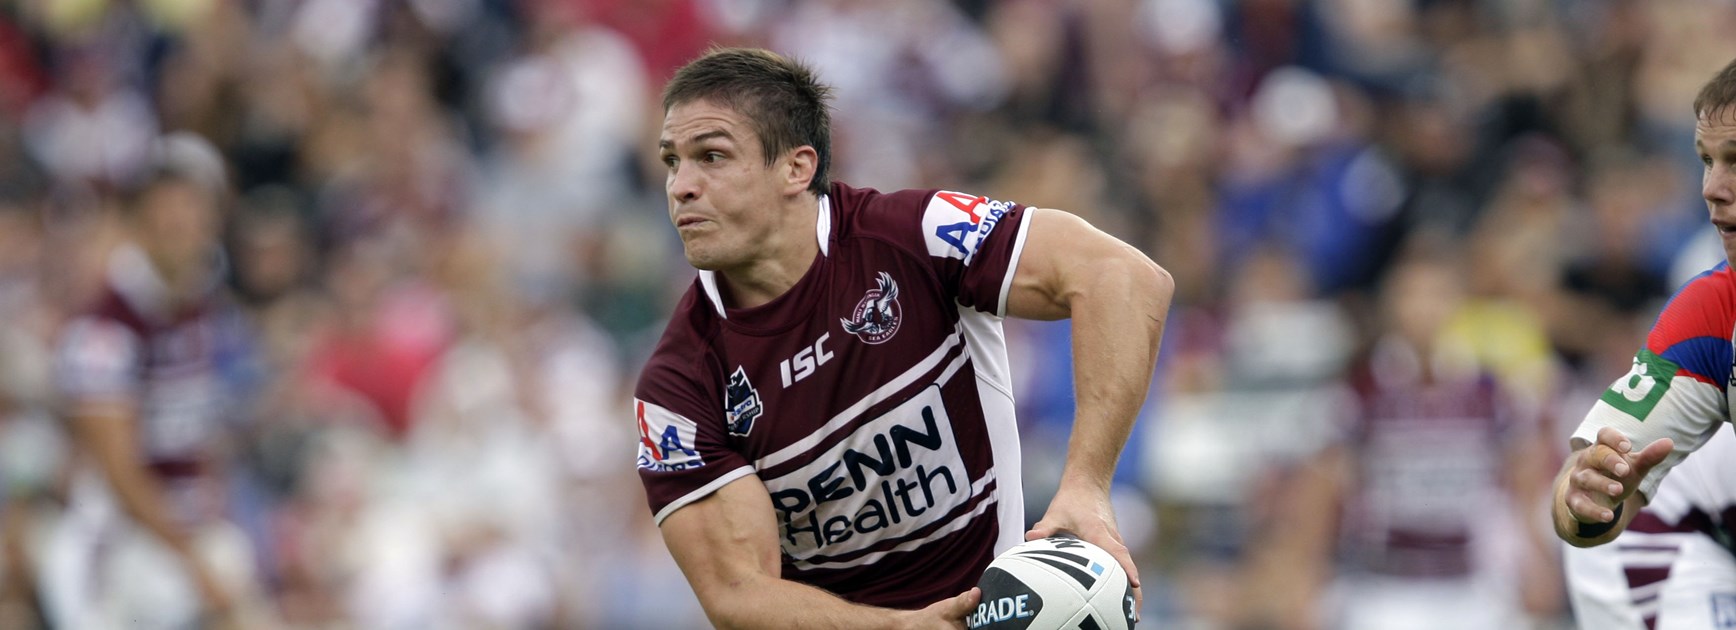 Former Manly Ironman to coach Blacktown Workers Sea Eagles